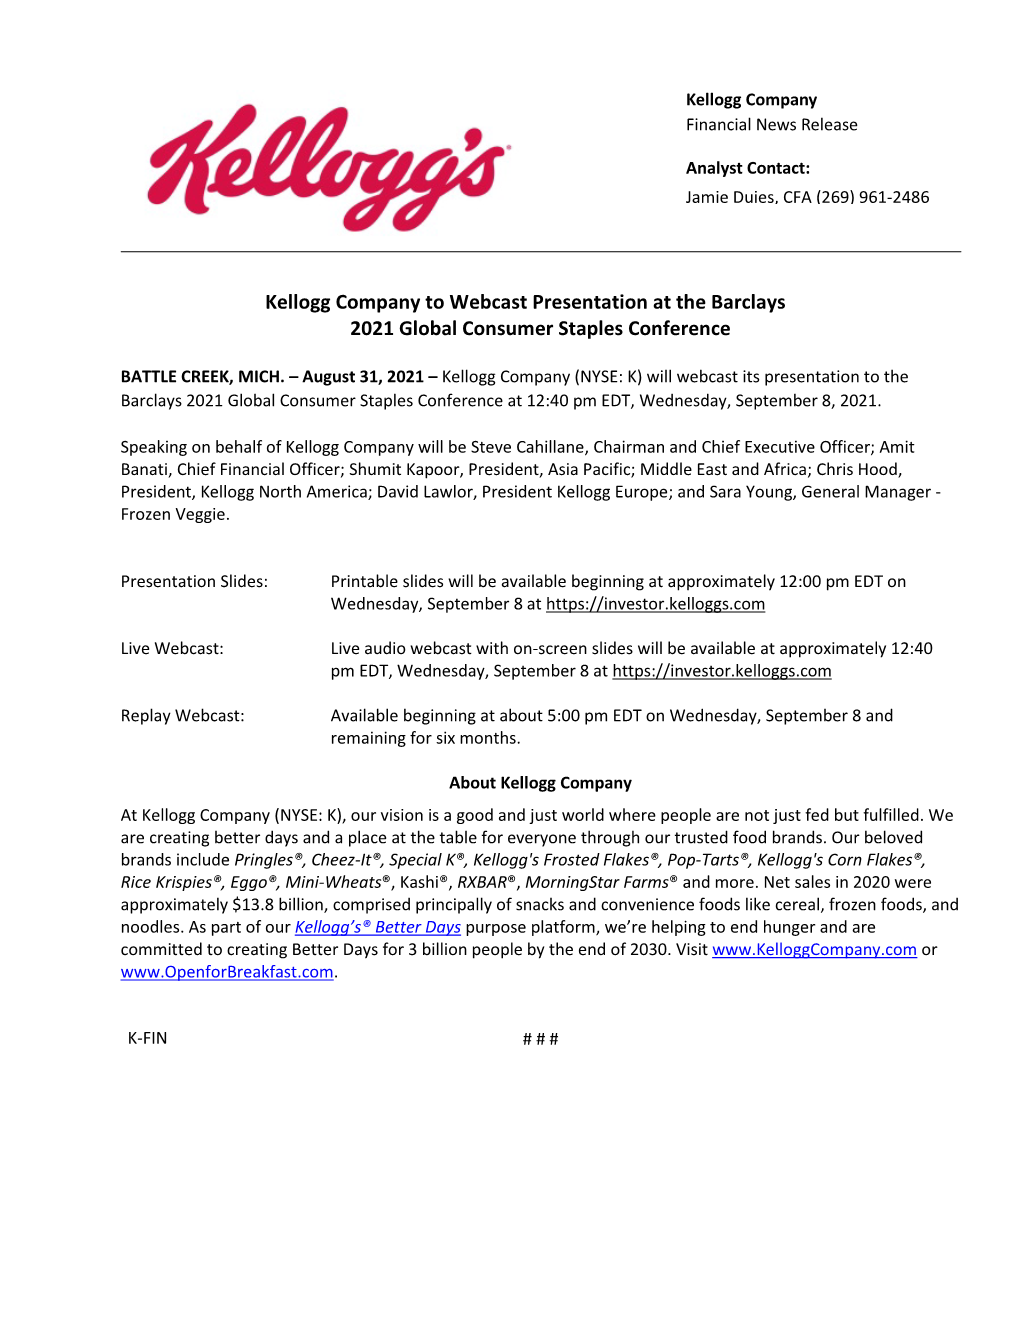 Kellogg Company to Webcast Presentation at the Barclays 2021 Global Consumer Staples Conference